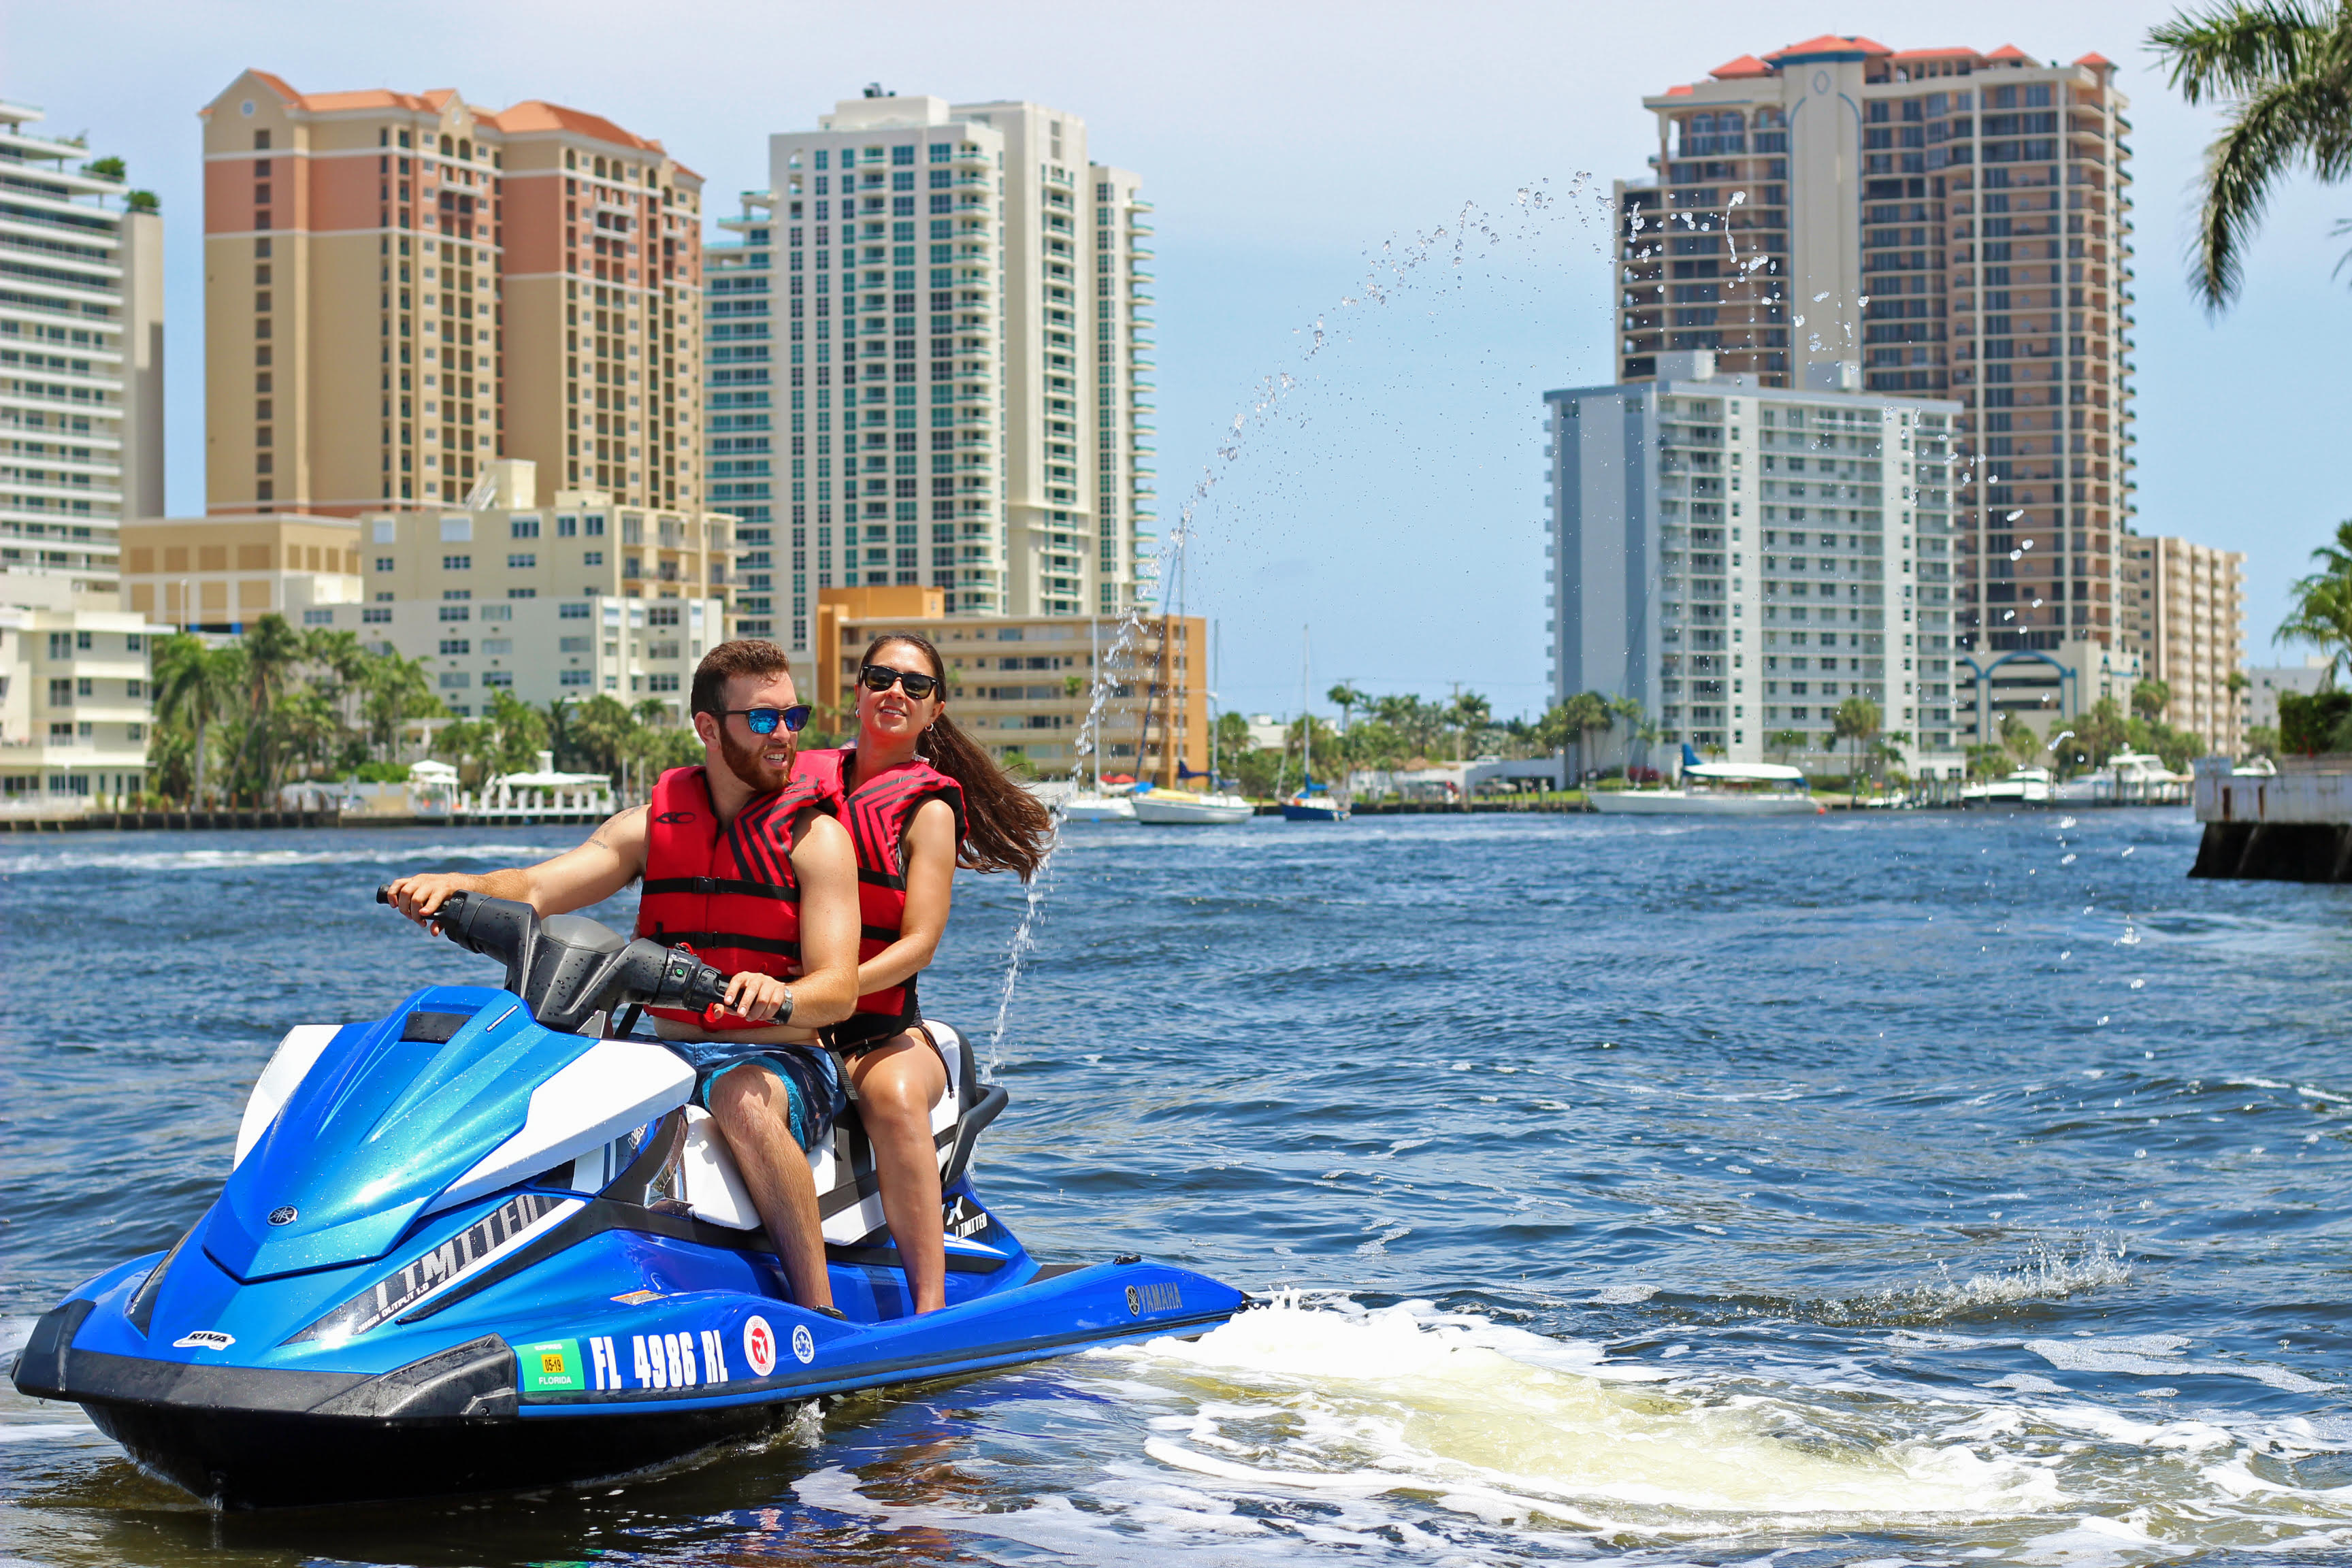 Get directions, reviews and information for Jet Ski Fort Lauderdale FL in F...